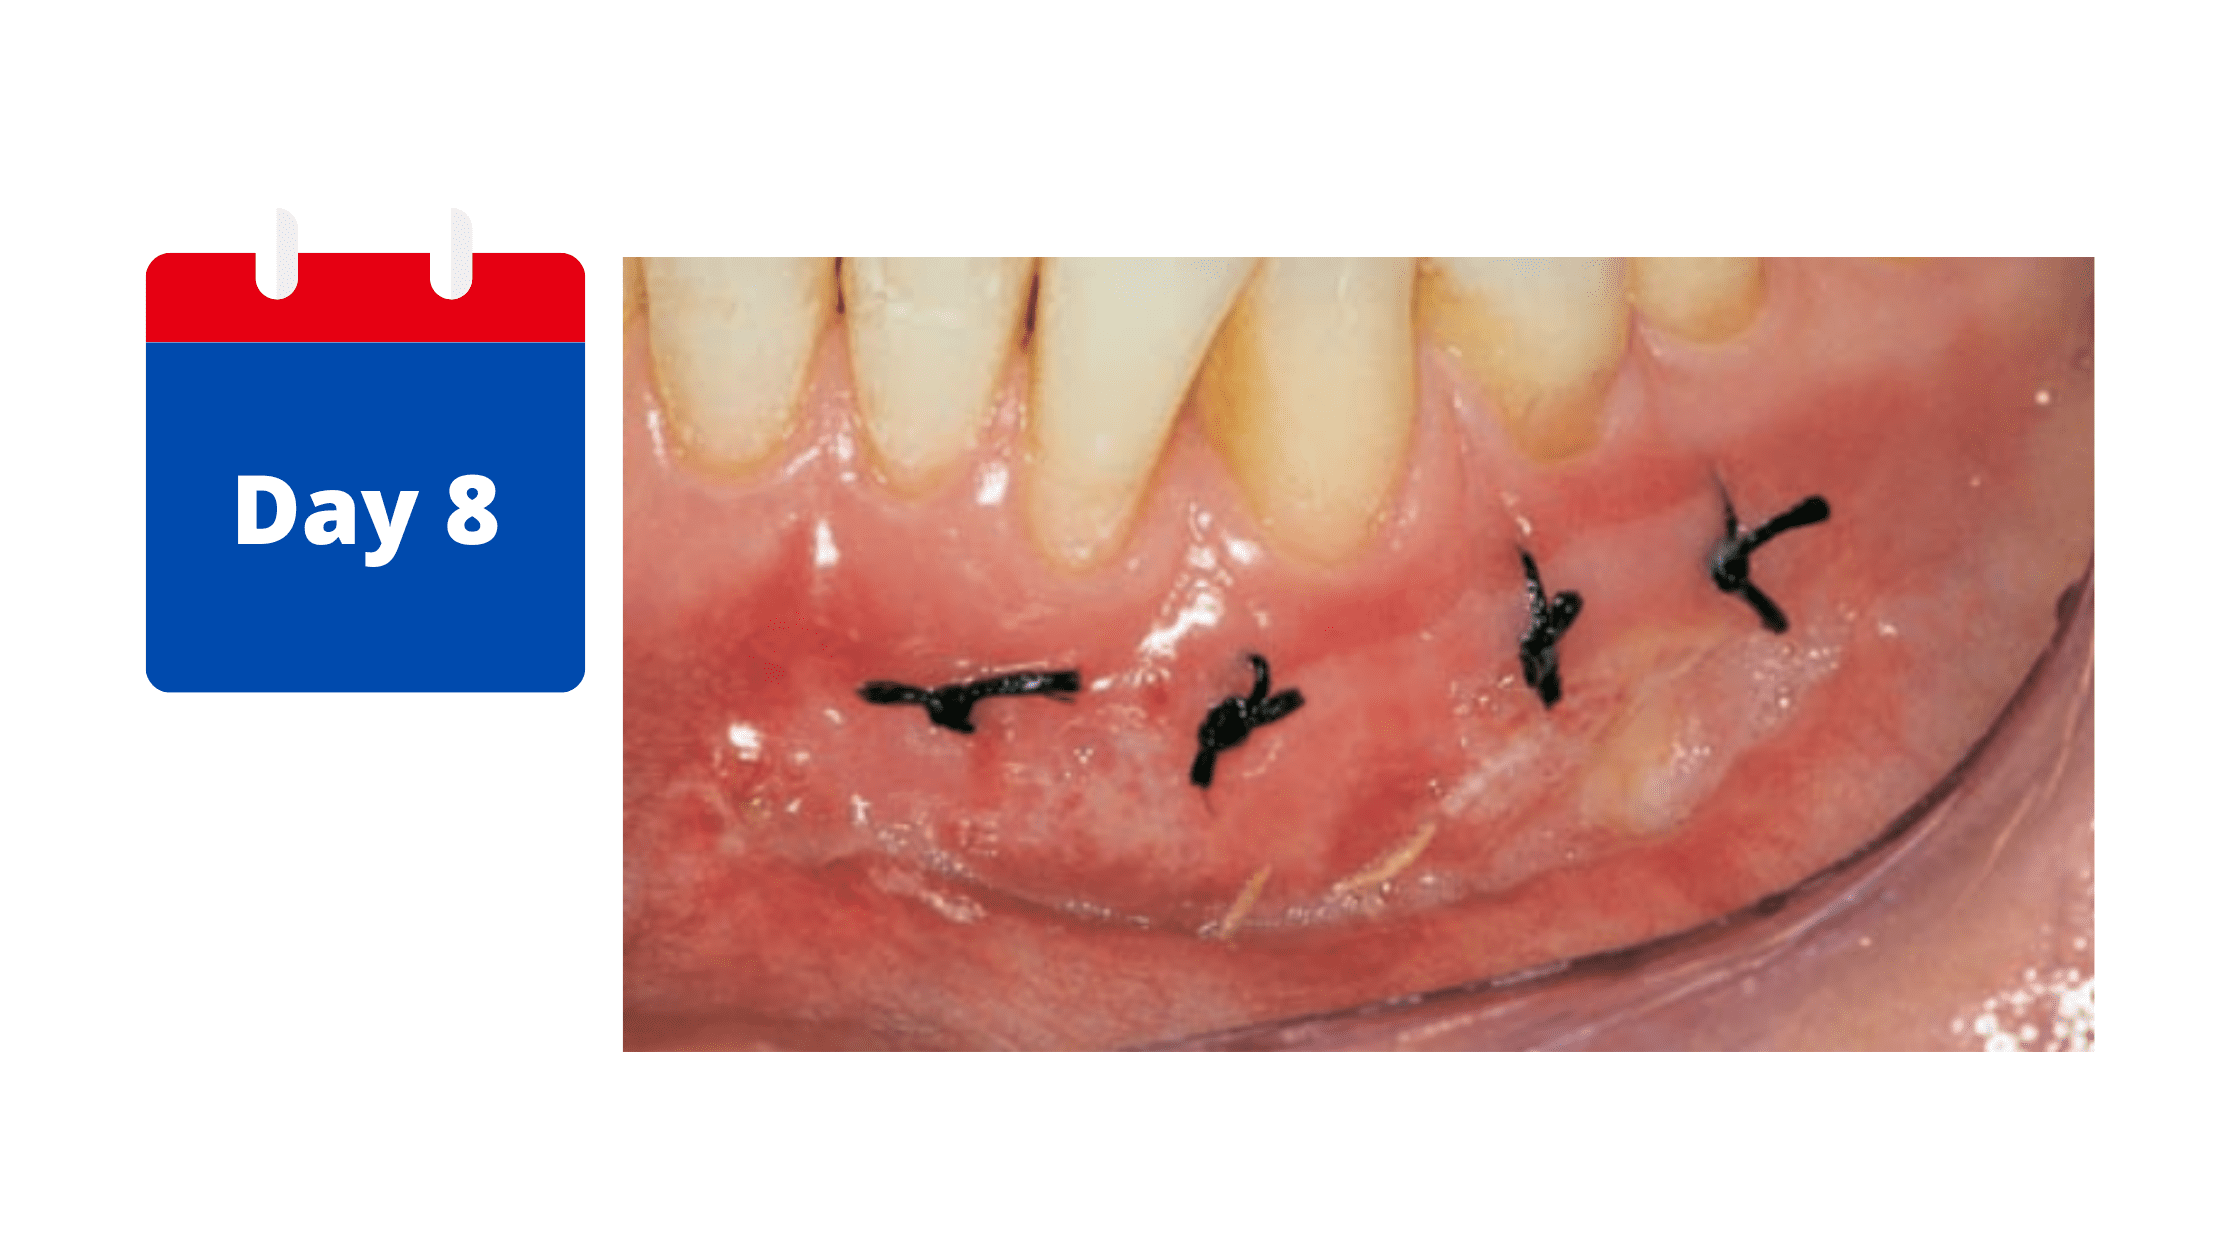 The third stage of gum graft healing: After 8 days 